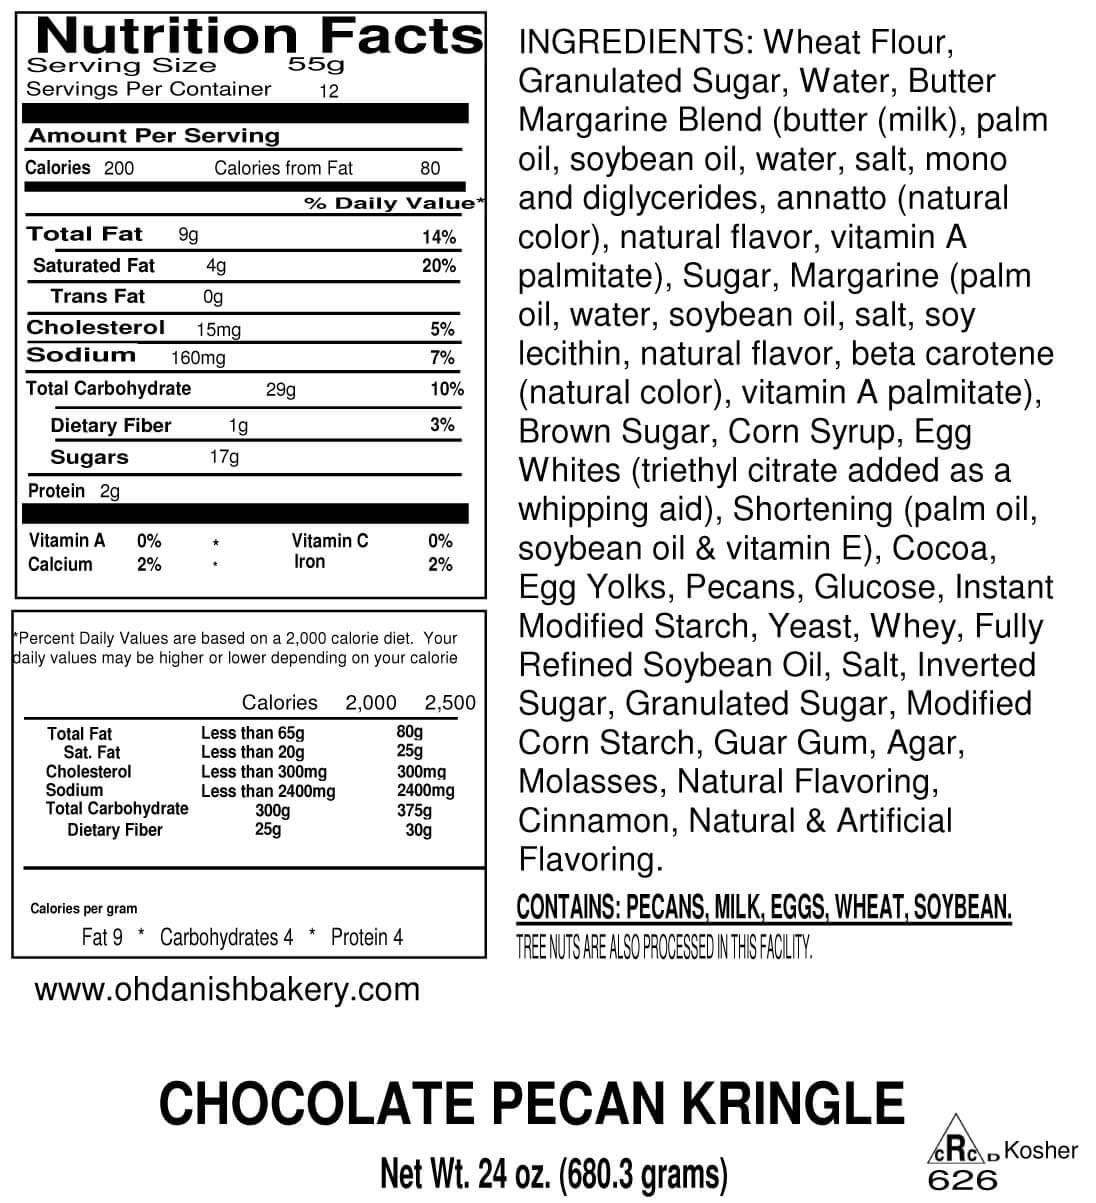 Nutritional Label for Chocolate Pecan Kringle